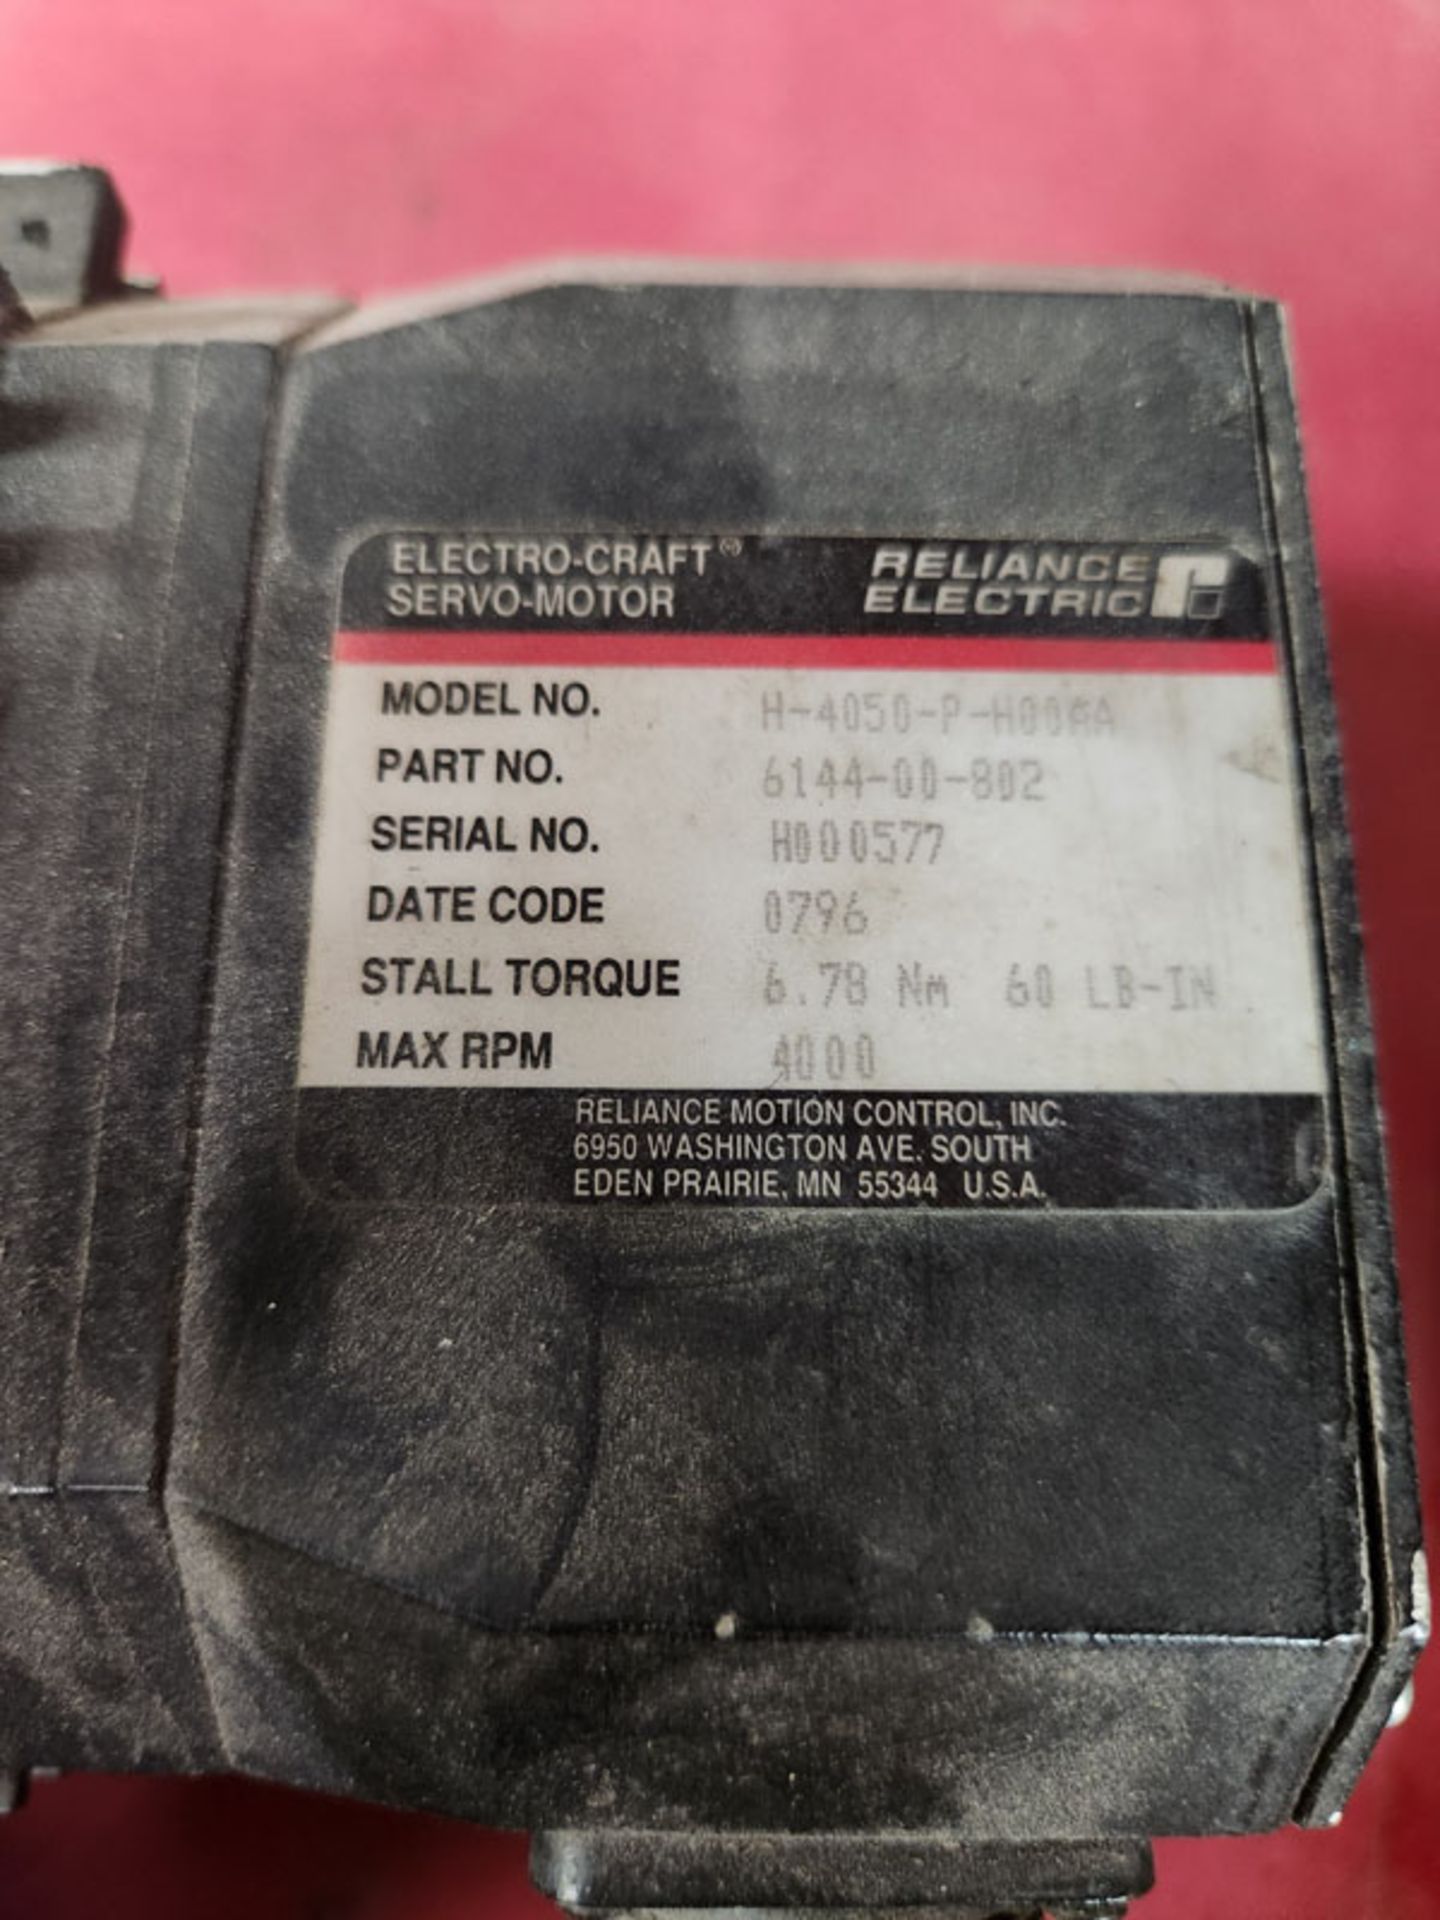 RELIANCE ELECTRIC ELECTRO-CRAFT SERVO-MOTOR MODEL: H-4050-P-H00AA , P/N: 6144-00-802 - Image 2 of 3